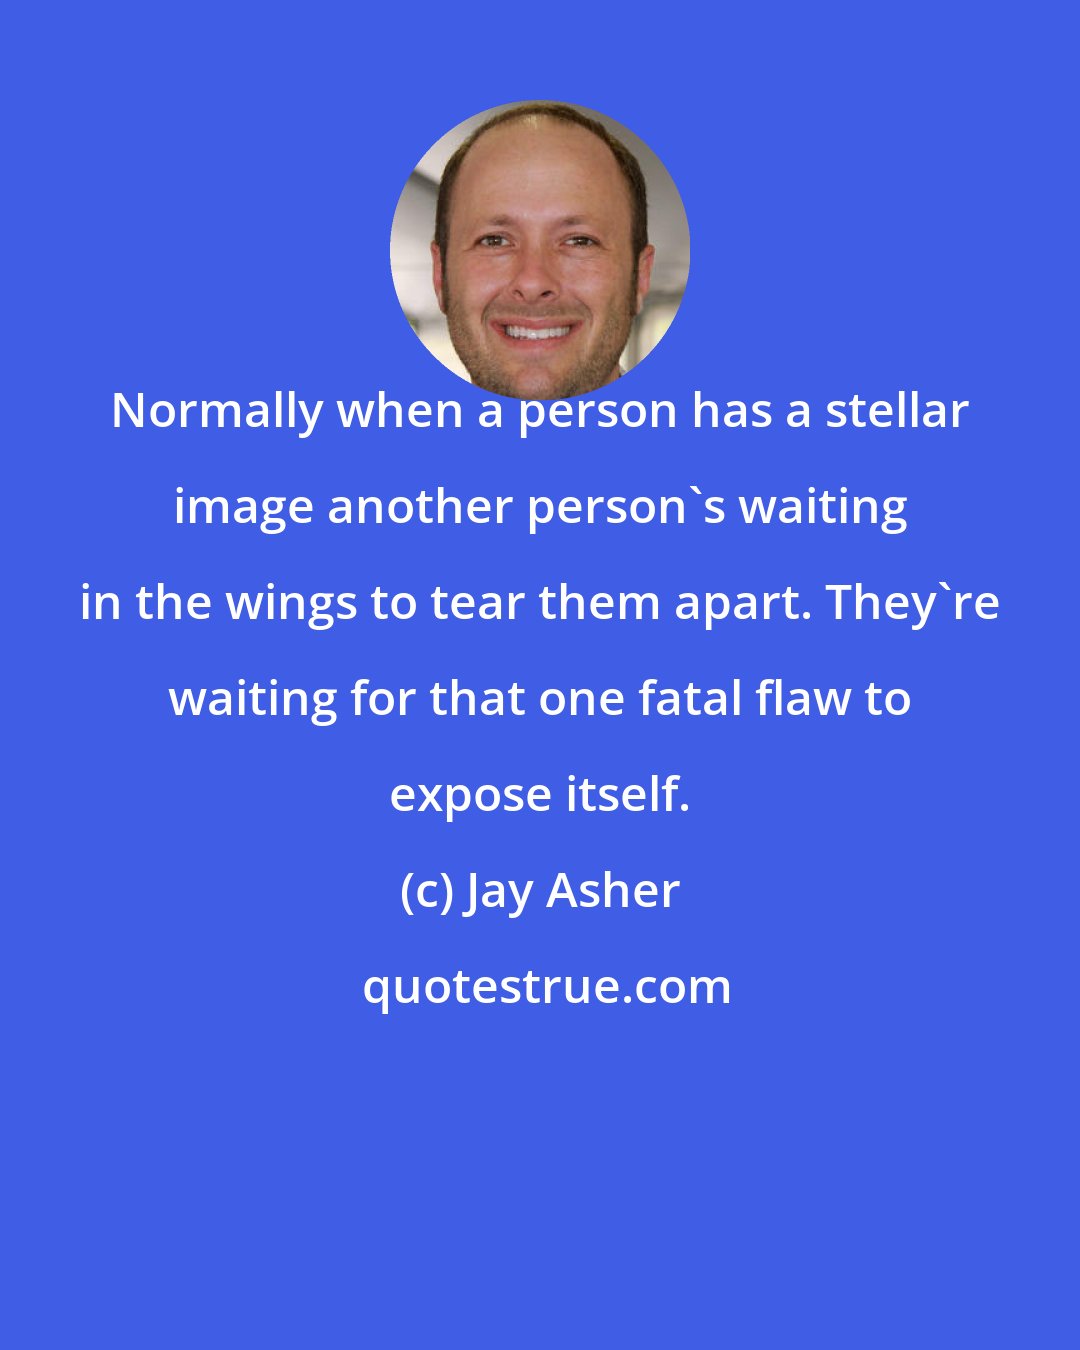 Jay Asher: Normally when a person has a stellar image another person's waiting in the wings to tear them apart. They're waiting for that one fatal flaw to expose itself.